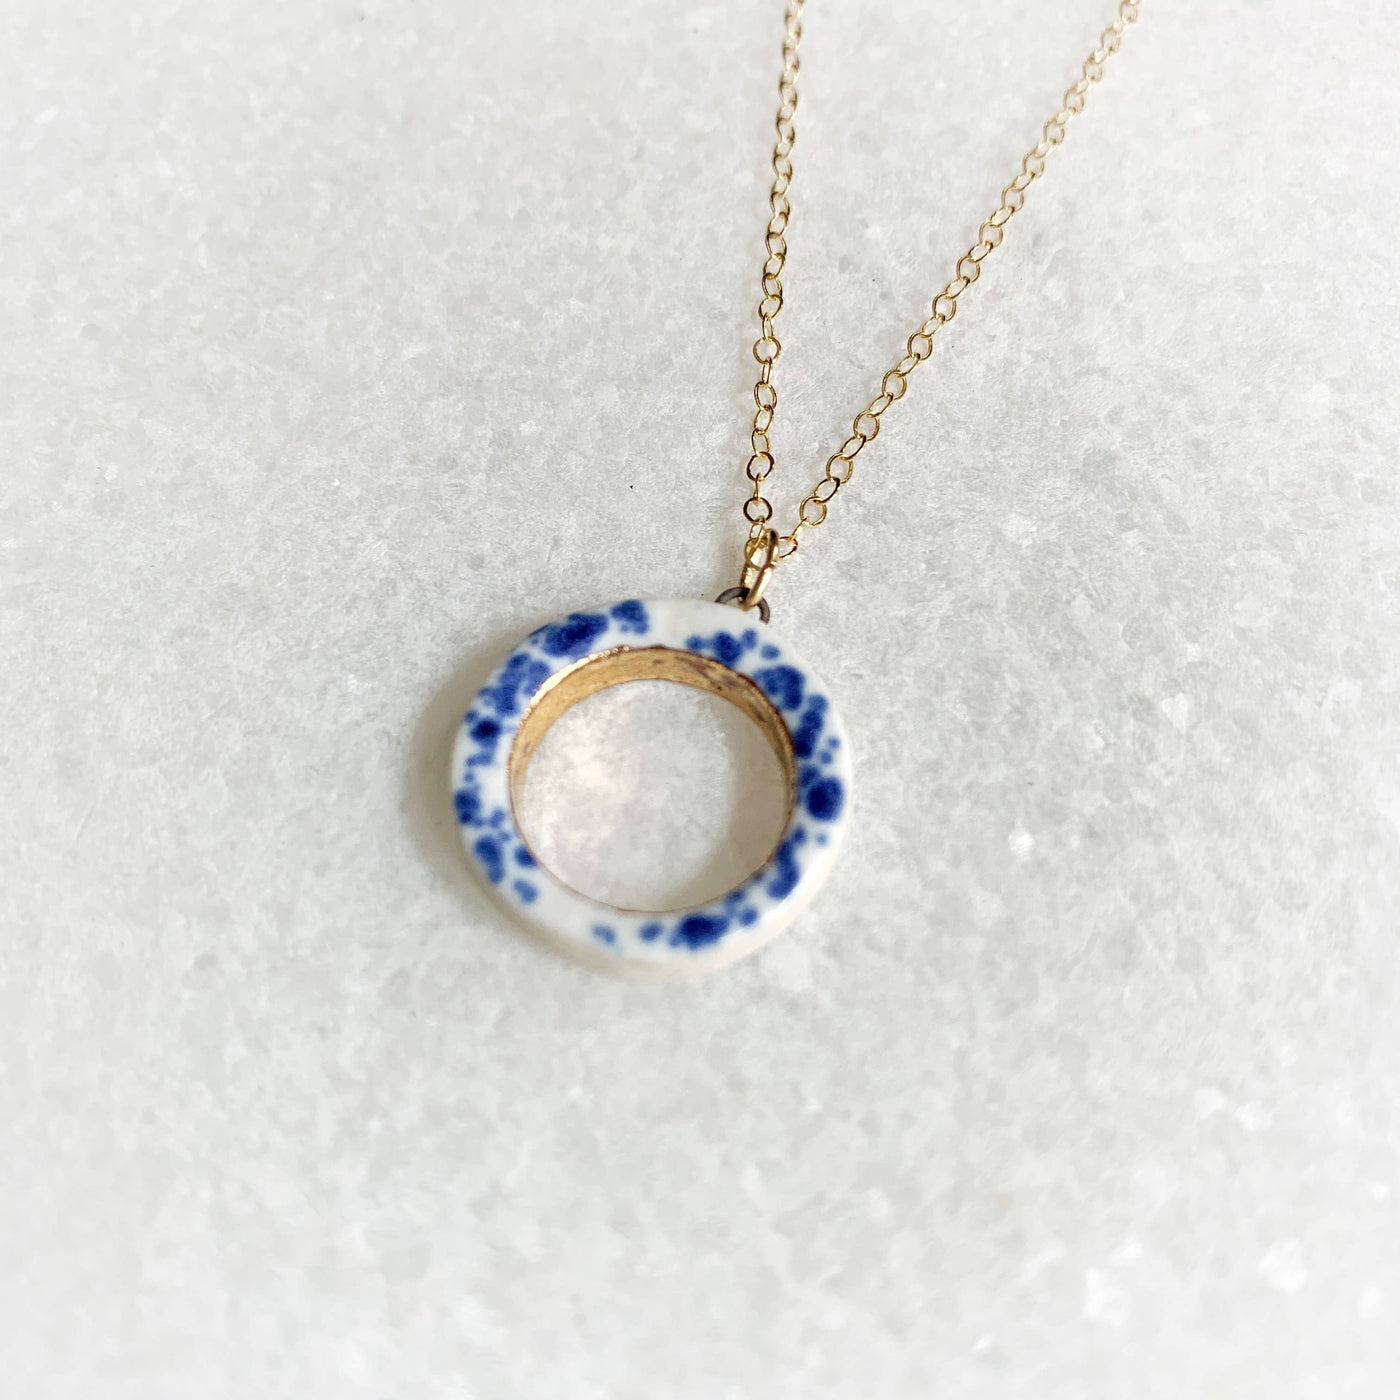 Necklace - Open Circle - Blue Speckle + Gold